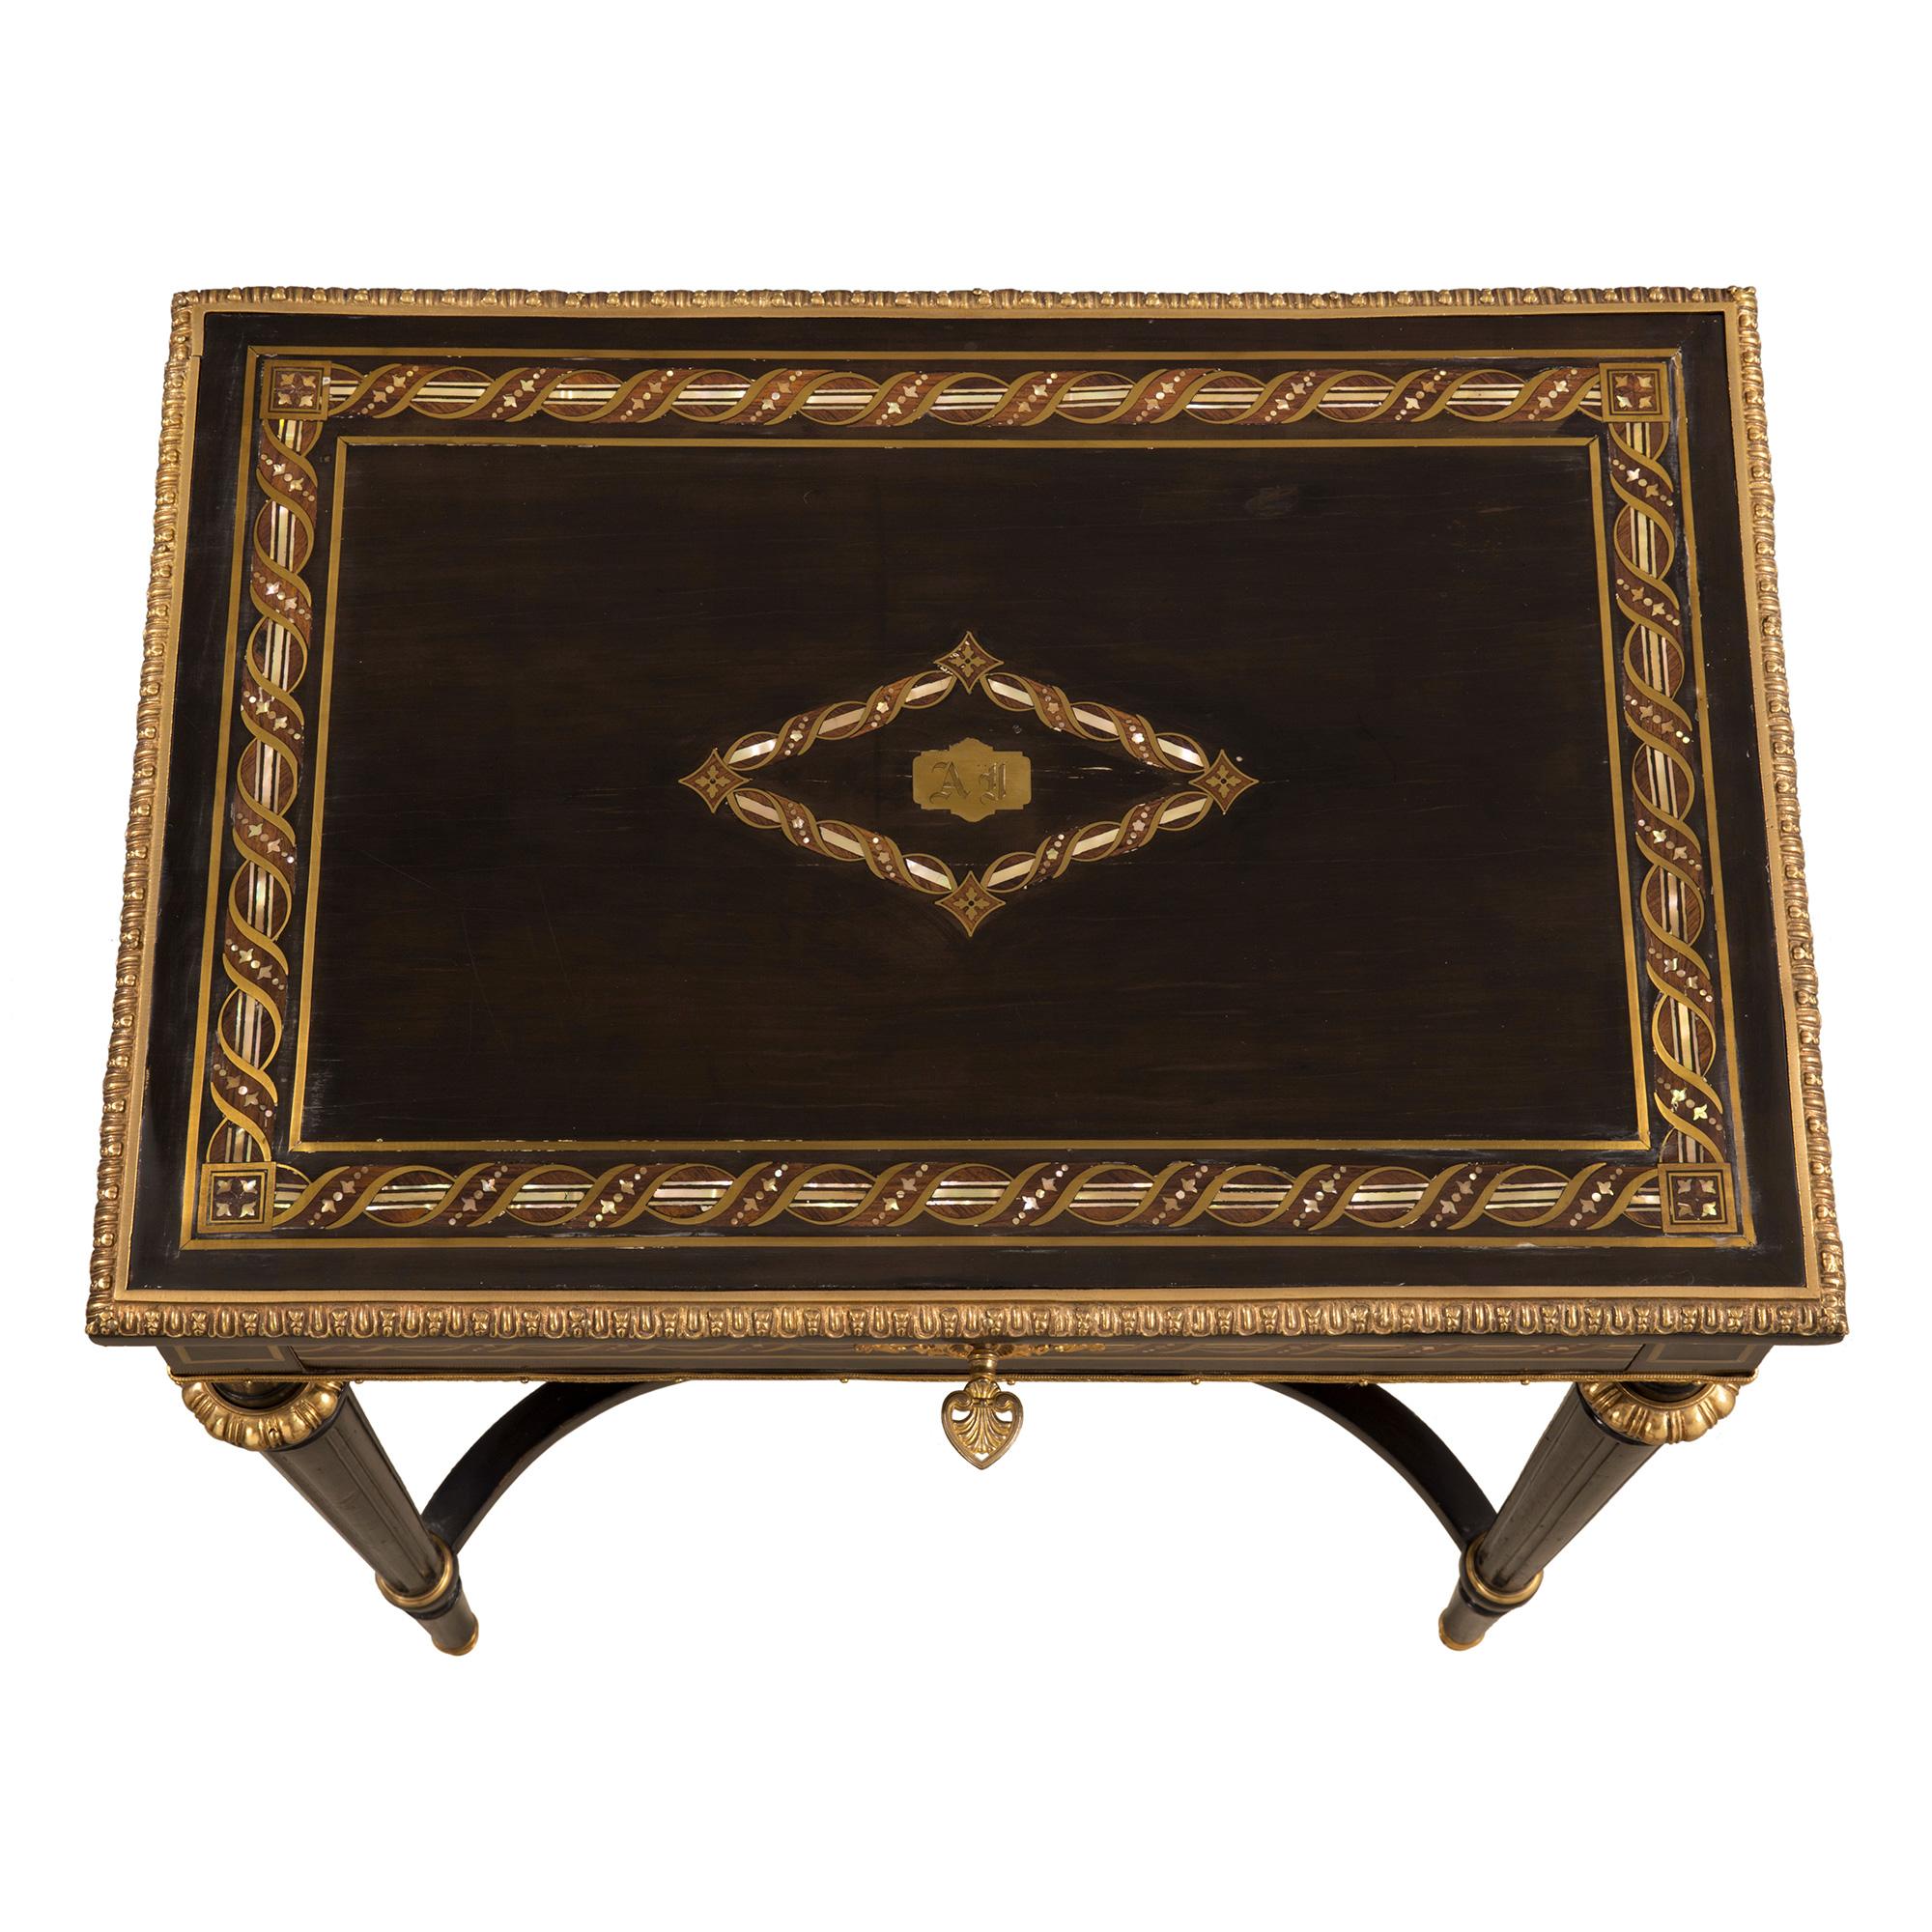 A most elegant and high quality French 19th century Louis XVI style Napoleon III period ebony, brass, tortoiseshell, mother of pearl and ormolu dressing table. The table is raised by fine straight fluted tapered legs with ormolu sabots. The legs are